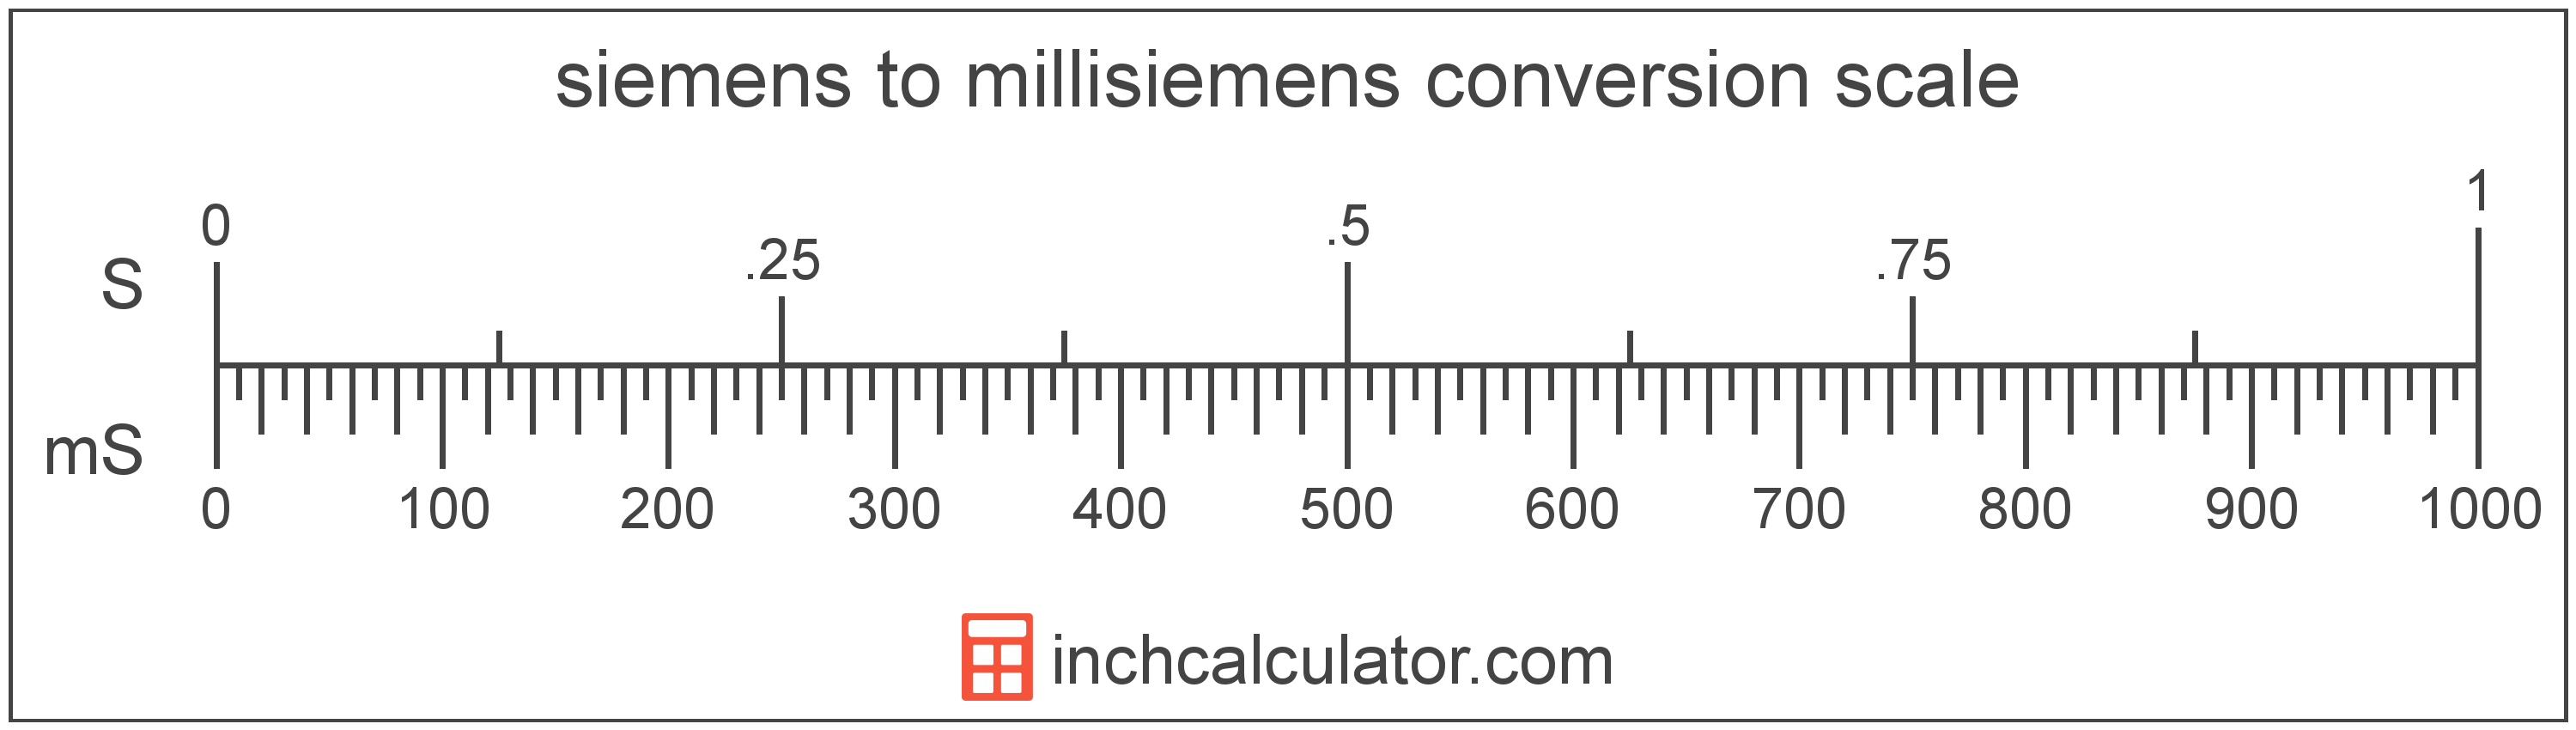 conversion scale showing siemens and equivalent millisiemens electrical conductance values